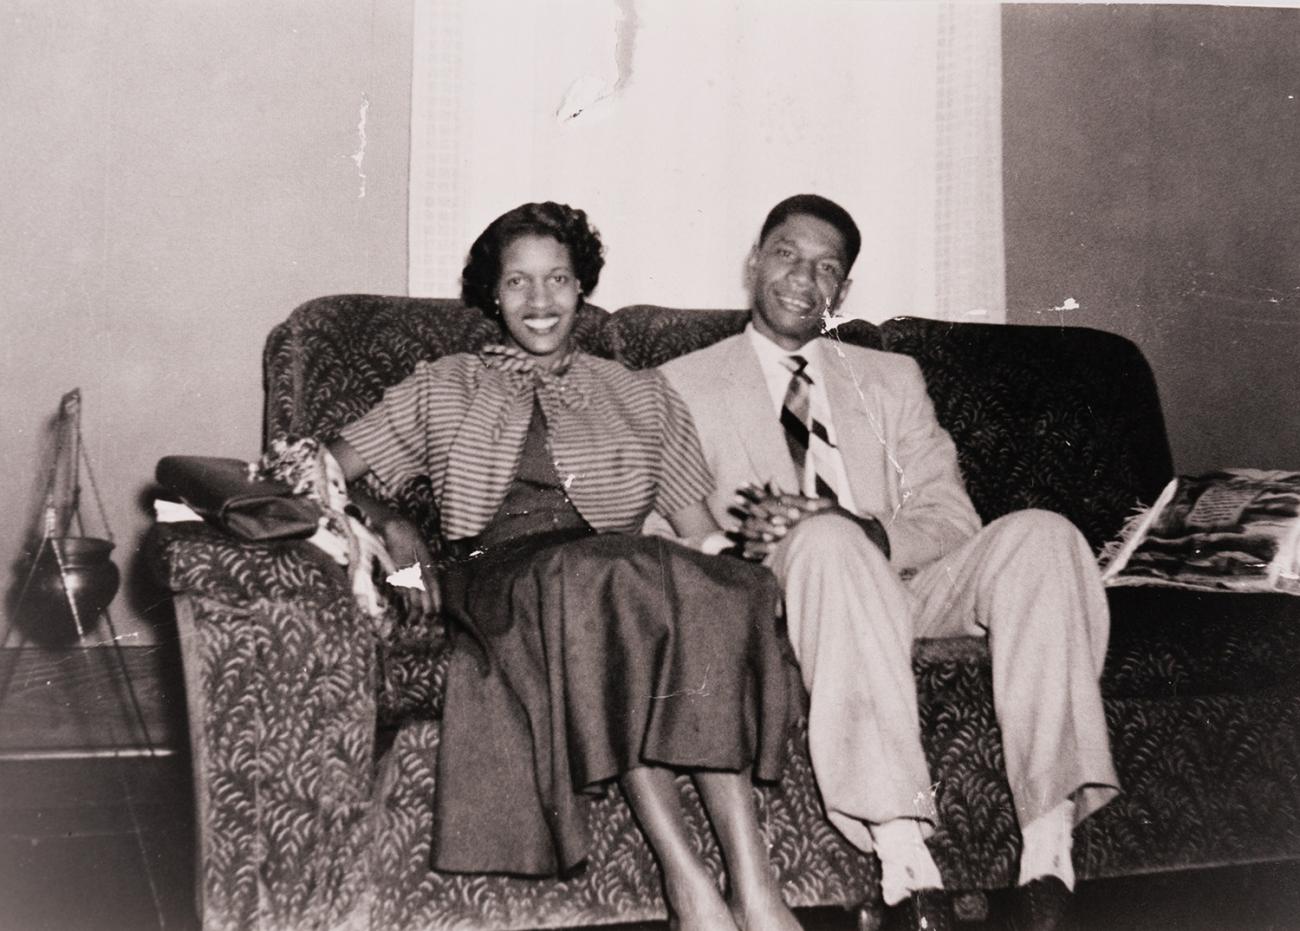 Myrlie and Medgar Evers in Mississippi in the early 1950s.